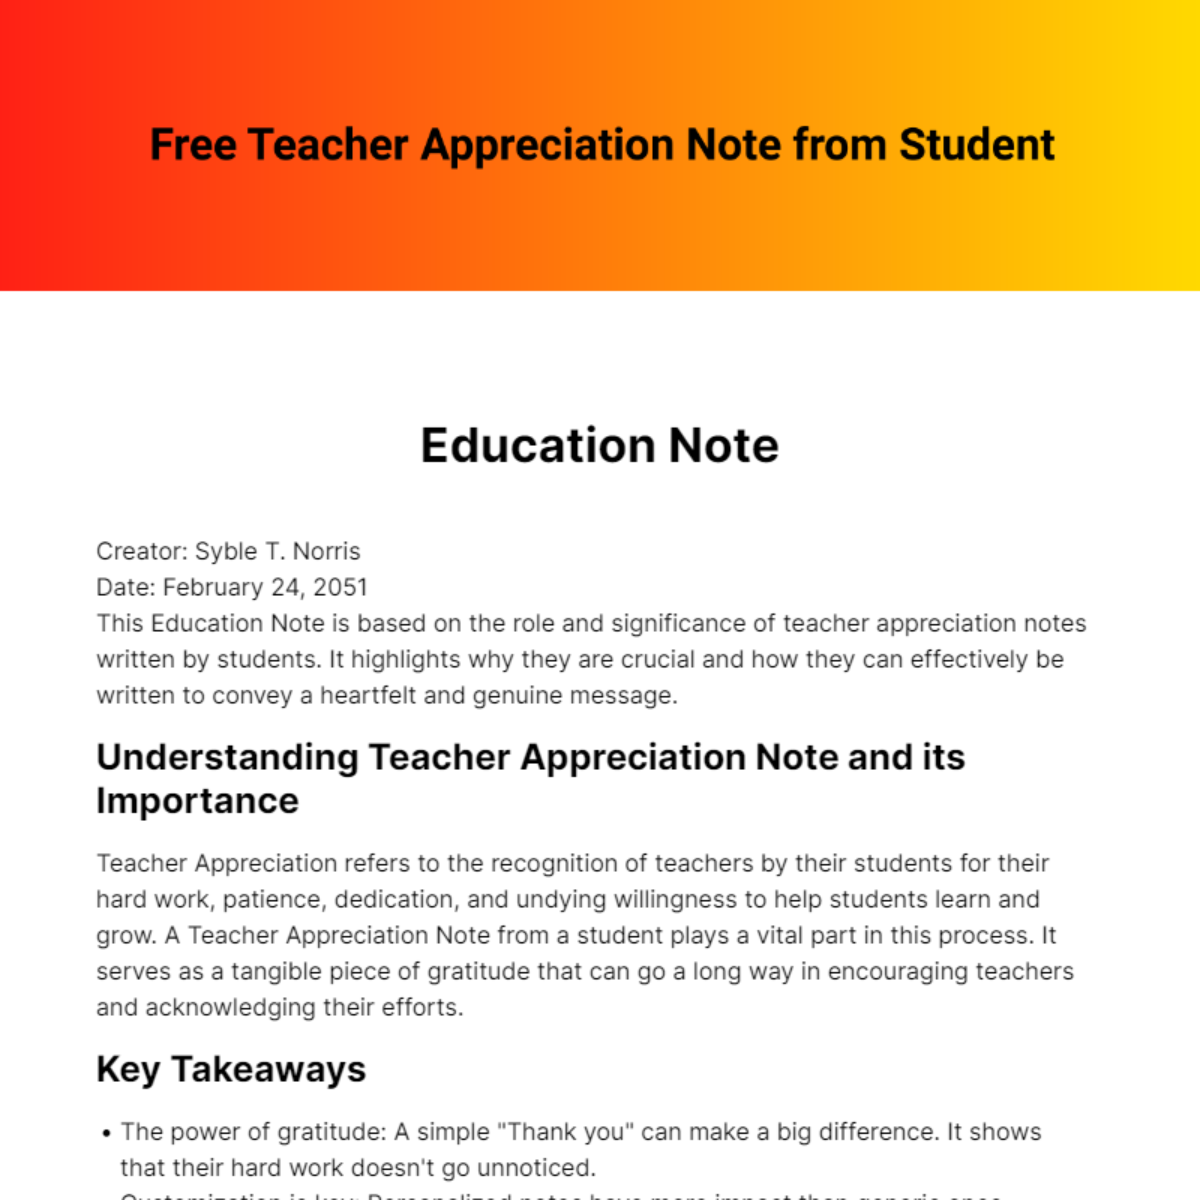 Free Teacher Appreciation Note from Student Template